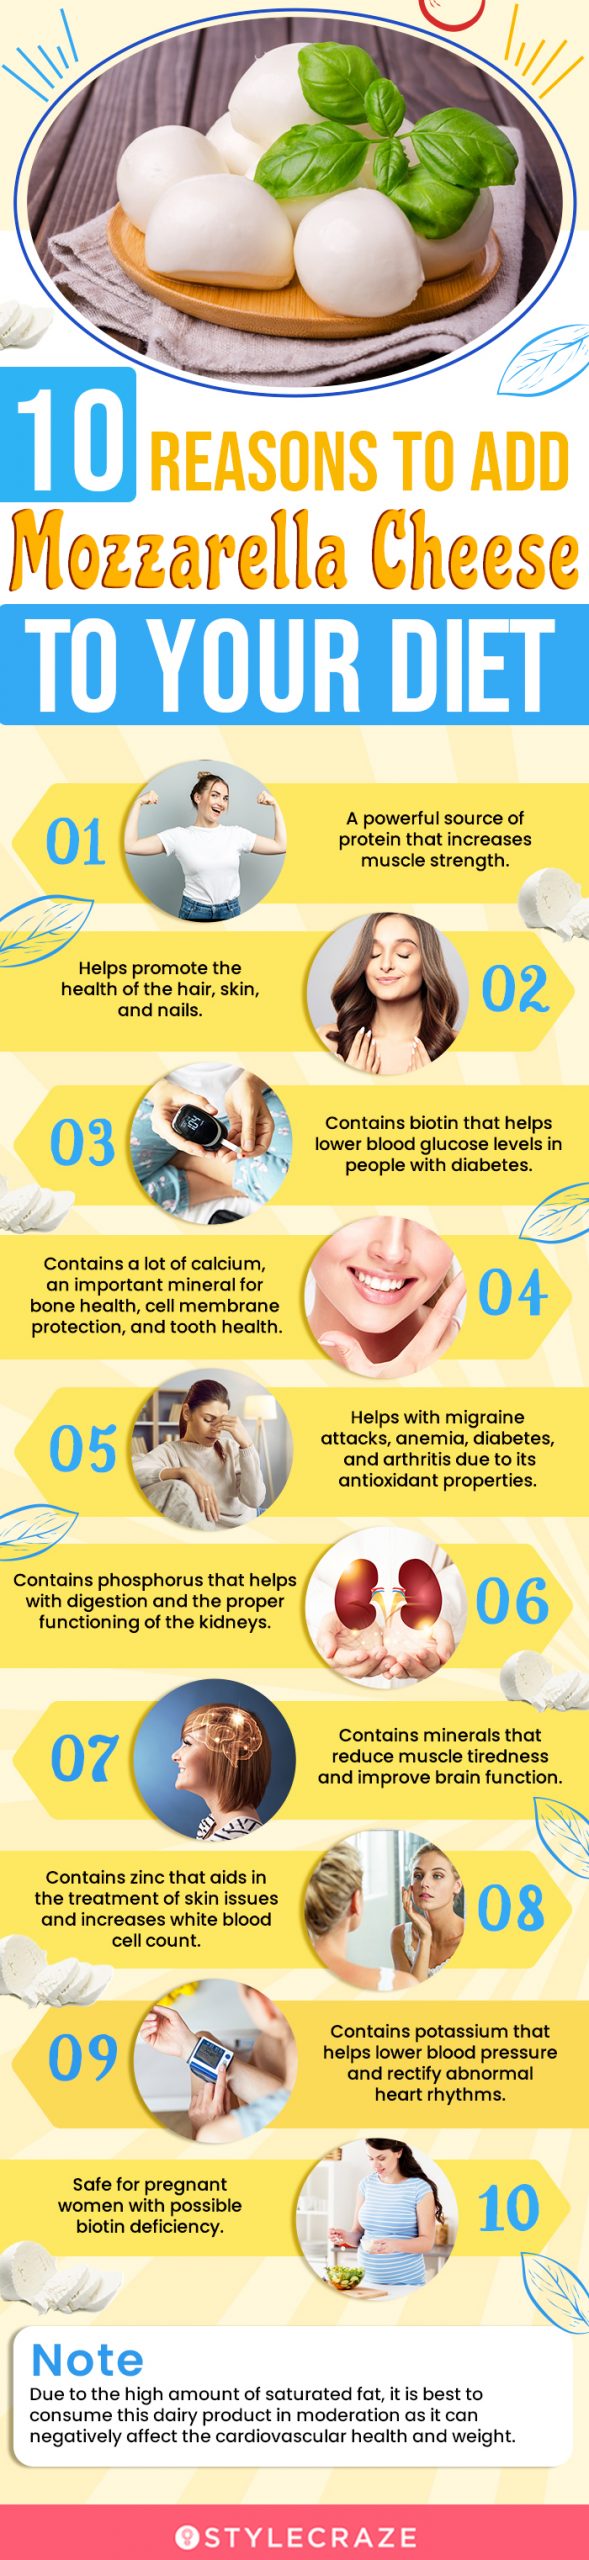 10 reasons to add mozzarella cheese to your diet(infographic)